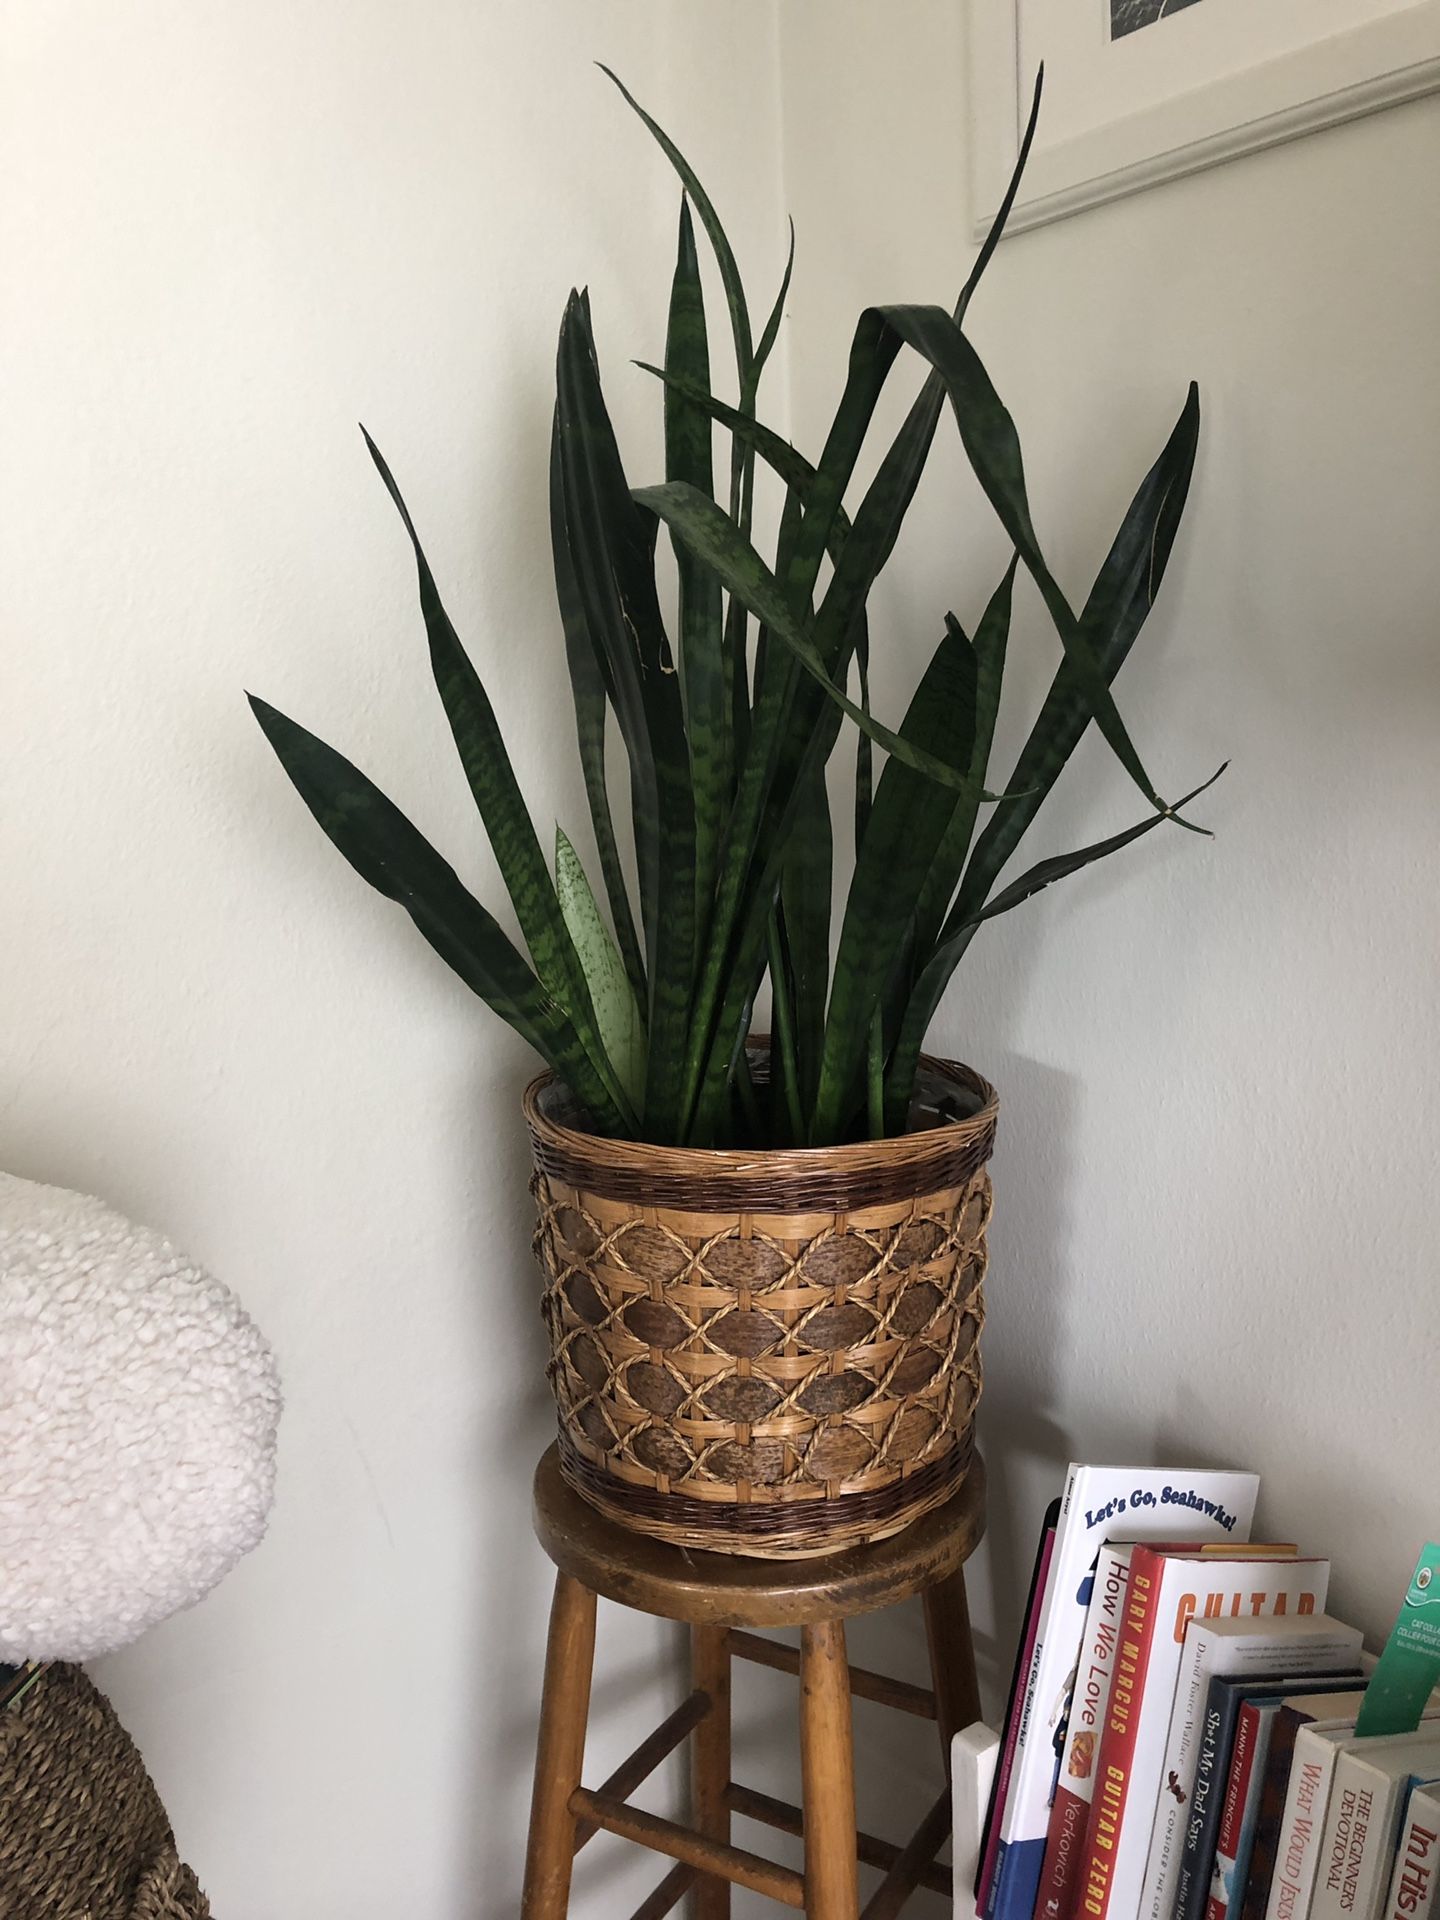 Woven basket (bamboo?) plant holder -$40 if you want the plant as well